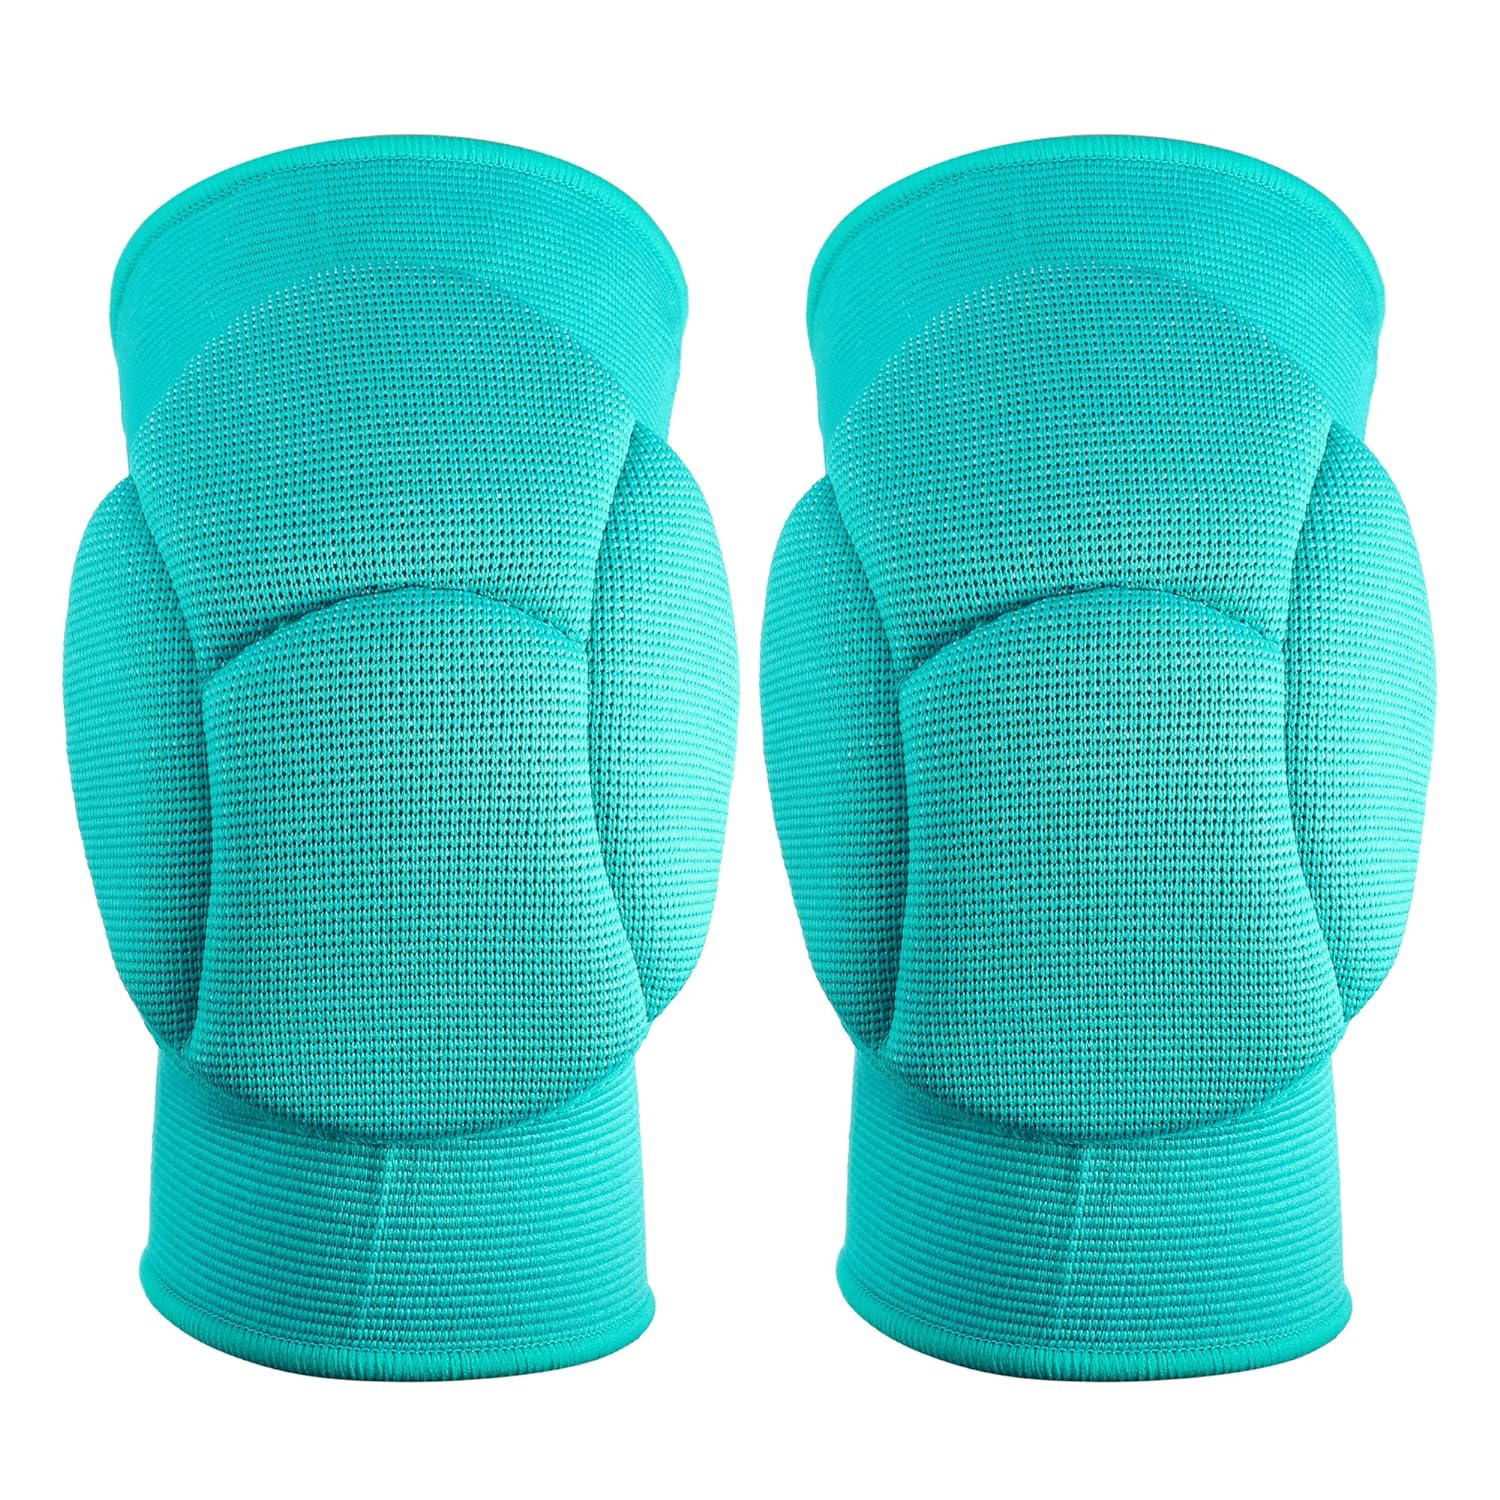 VOCOSTE 1 Pair Sporting Protective Knee Pad, Breathable Flexible Knee Support Compression Sleeve Brace, for Football Volleyball, Polyester, Green Size S